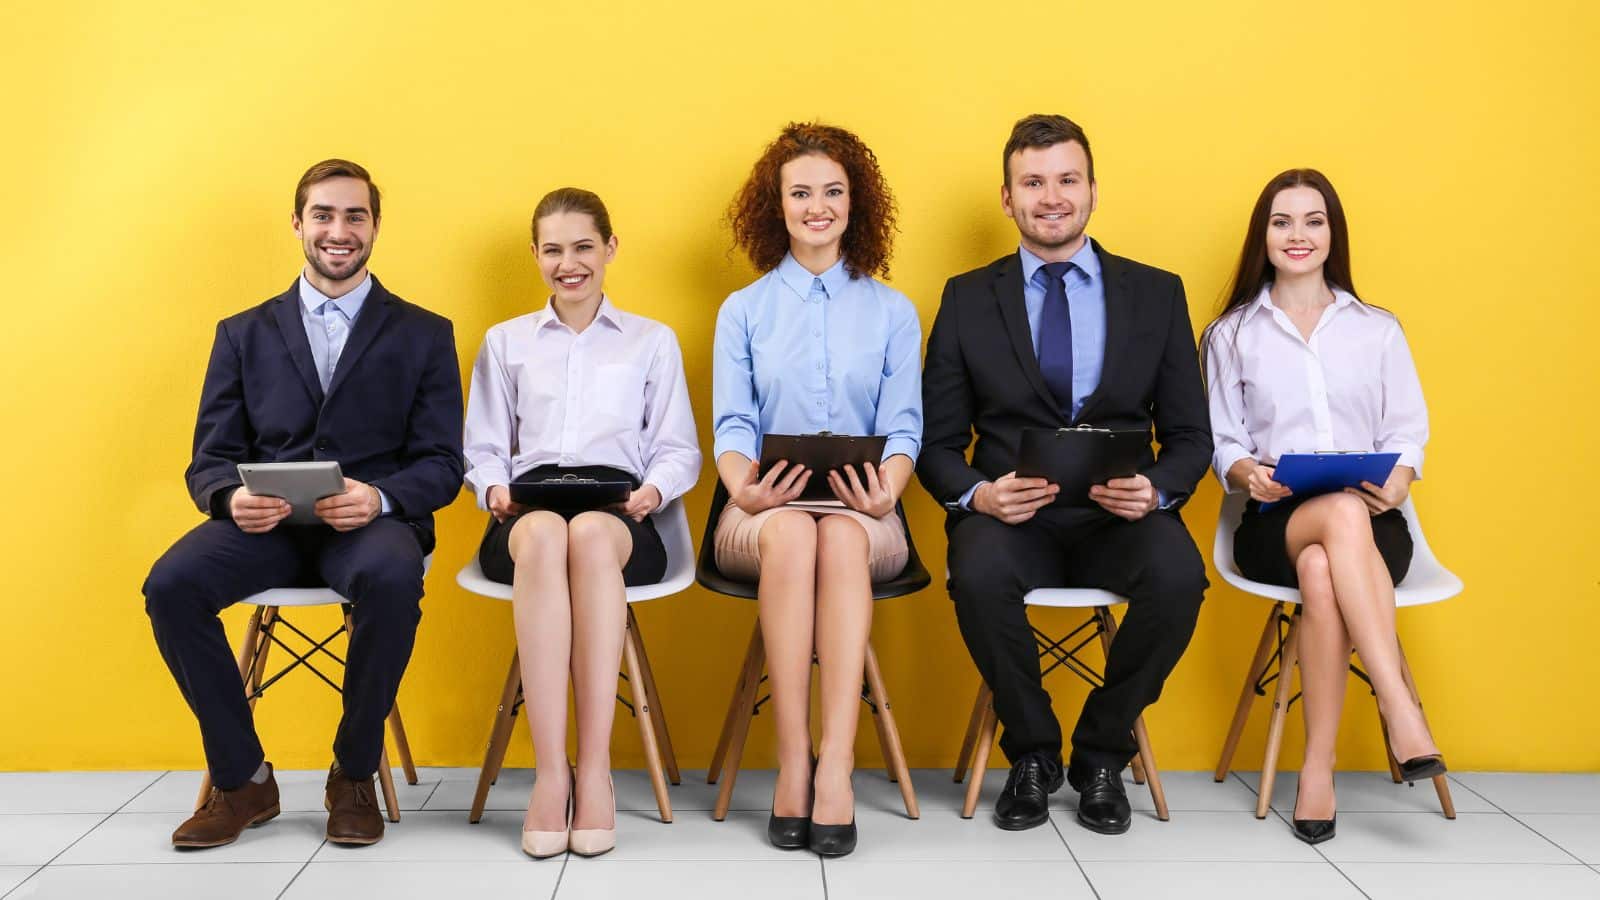 smiling group of people waiting for a job interview with a yellow background